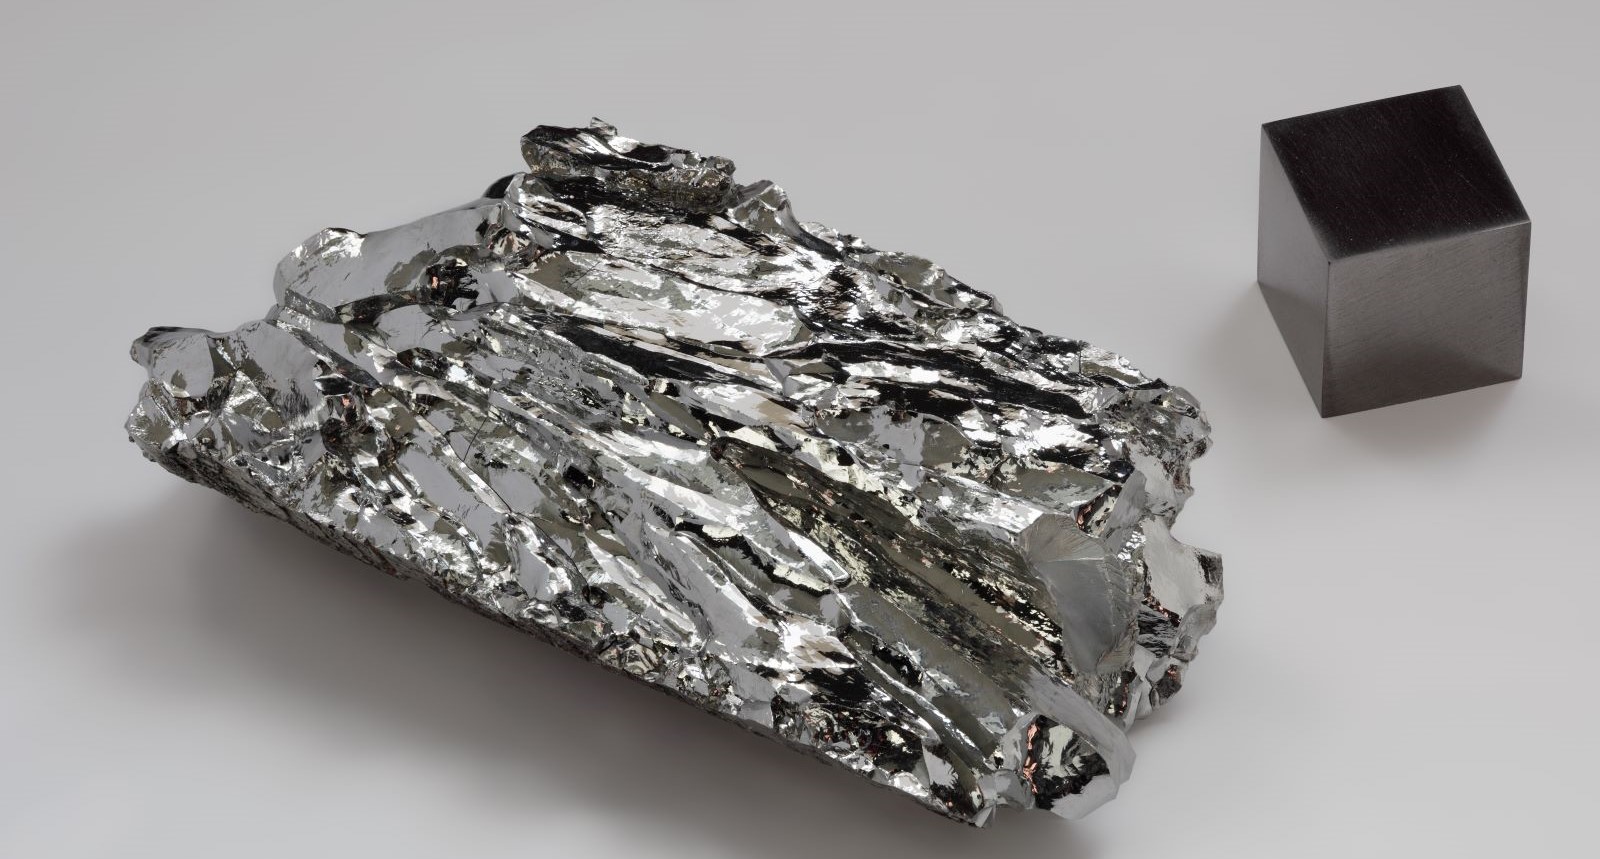 The Global Molybdenum Market Growth Accelerated By Increasing Use In Steel Production